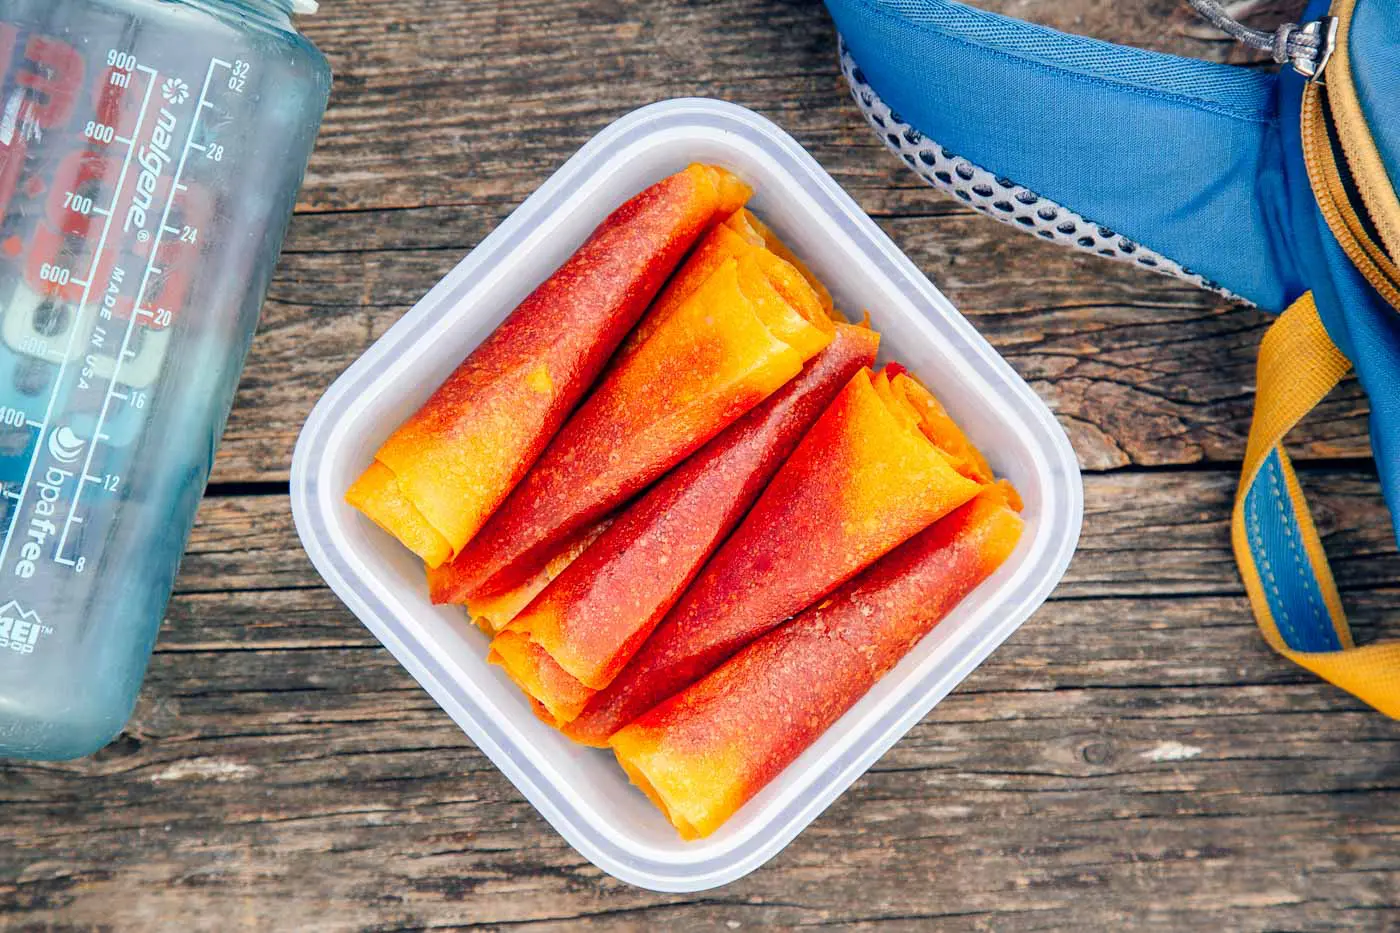 Mango strawberry fruit leathers in a container